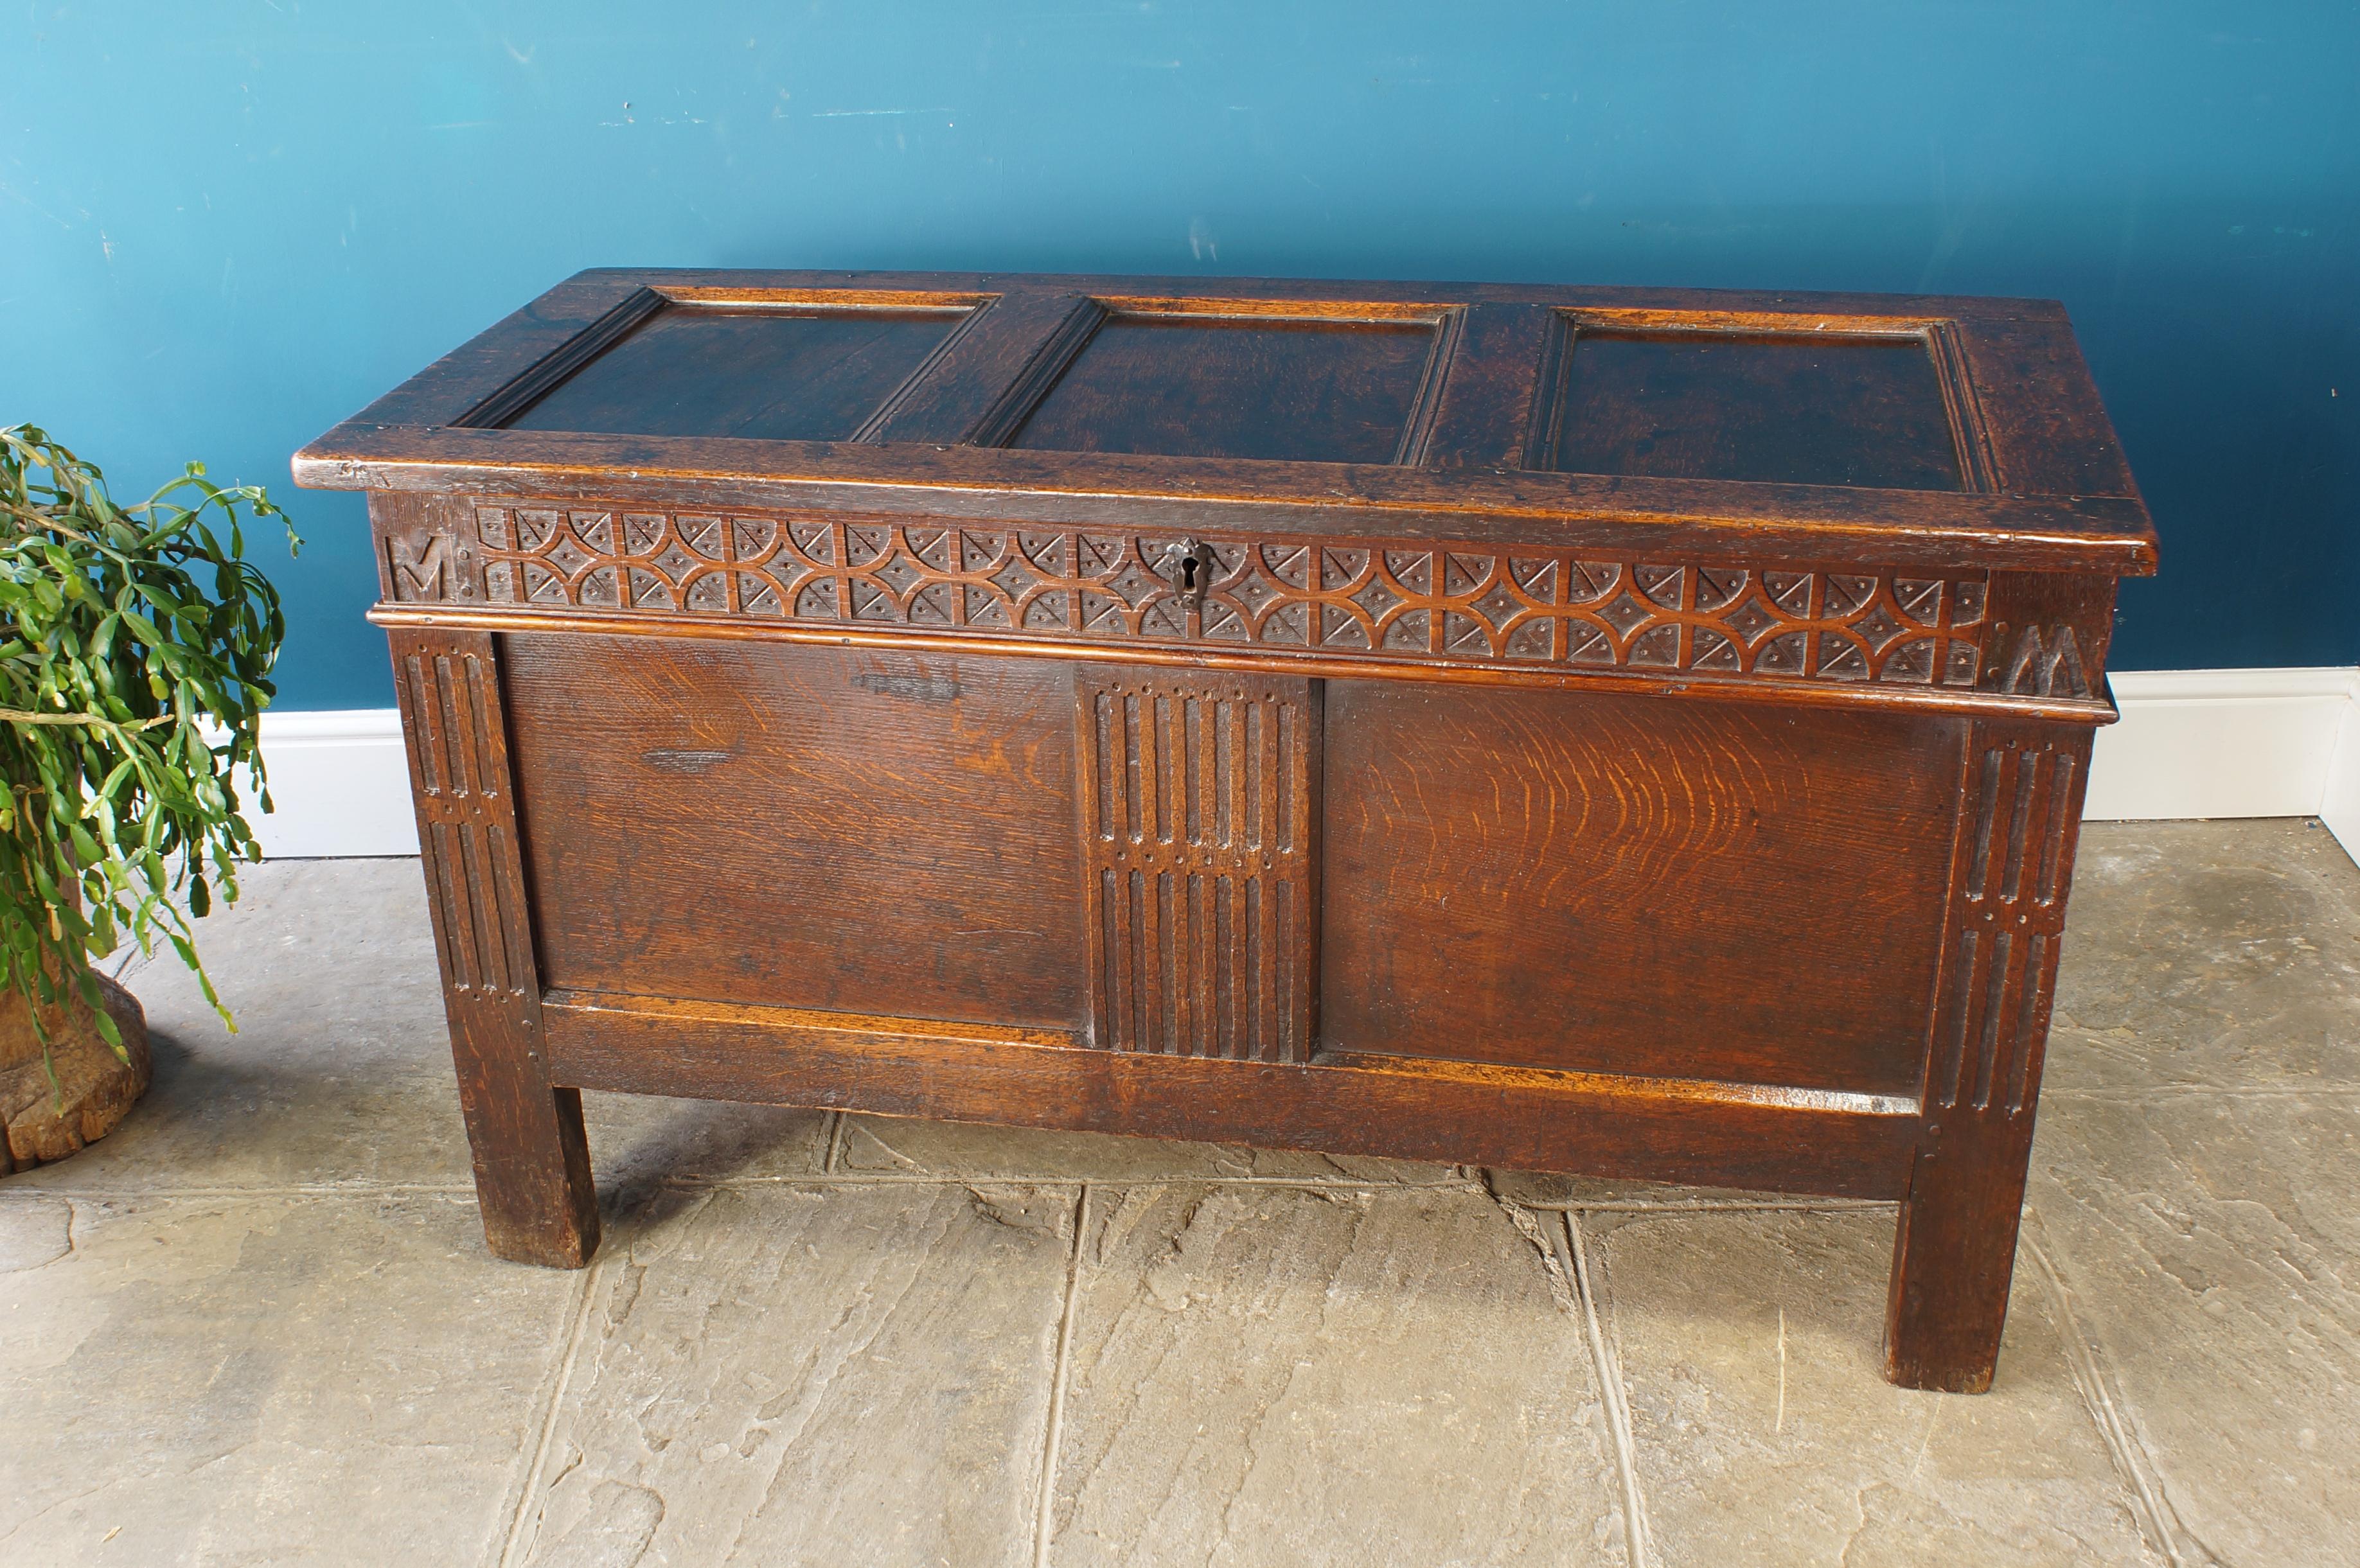 A good clean and original 17th Century Oak Coffer. With a crisply carved strapwork top rail. The legs and wide centre rail are carved with a fluted design.
Excellent colour and condition, standing well up on its legs and retaining the original